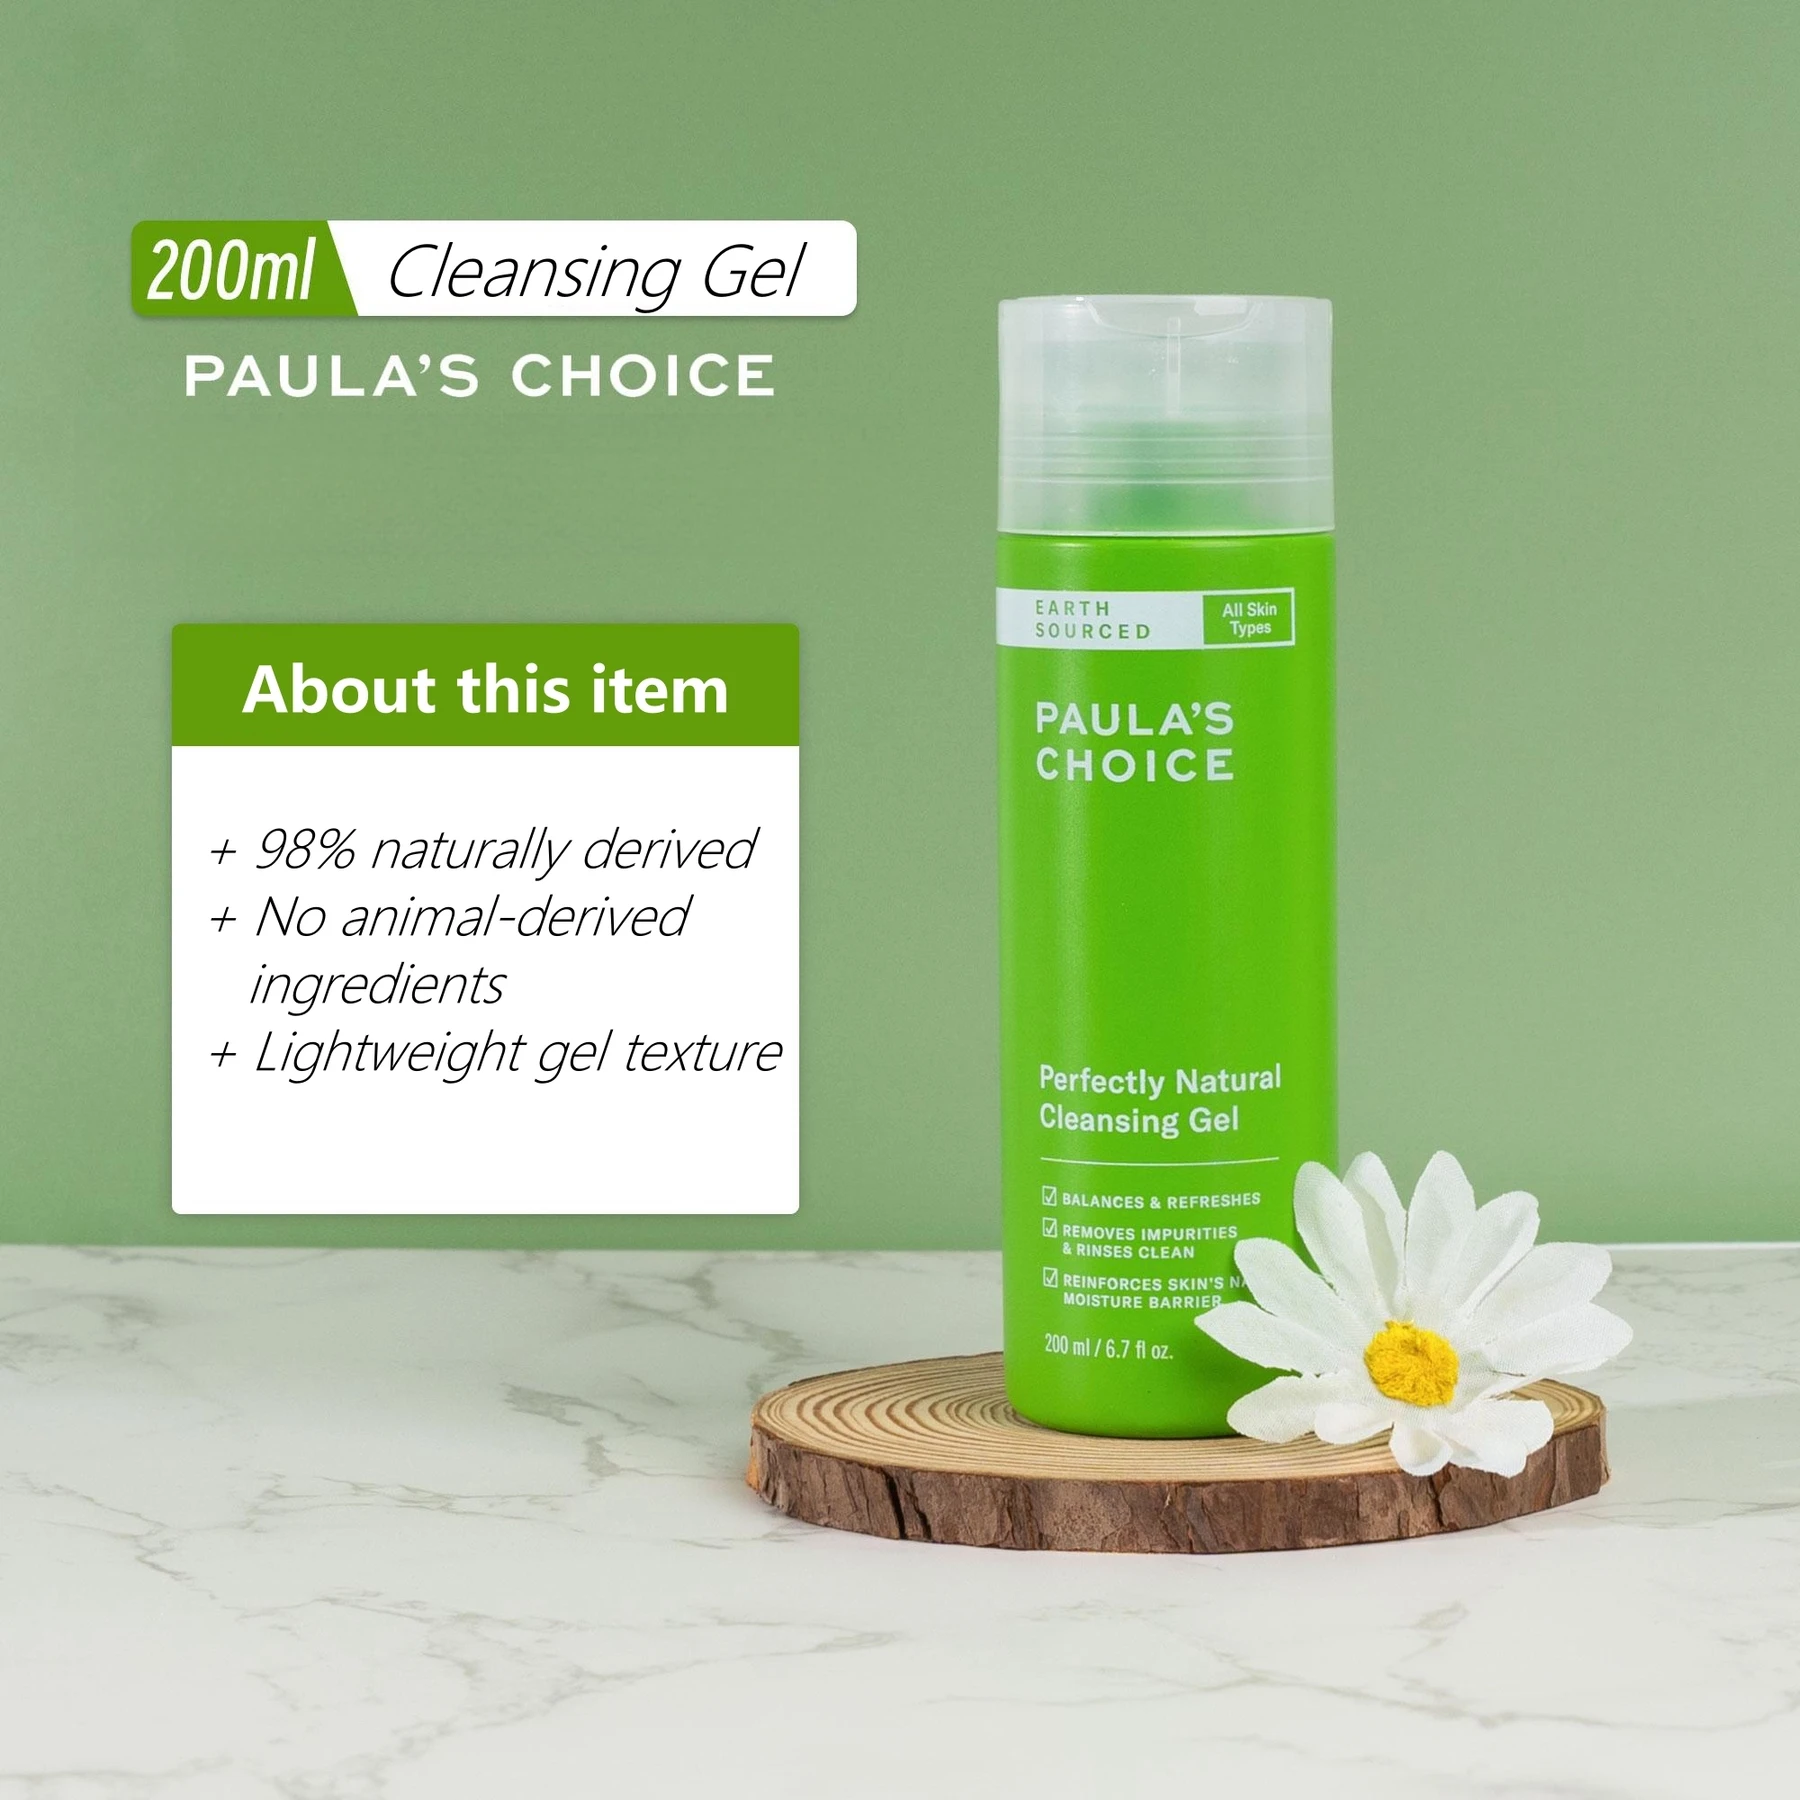 

200ml Paula's Choice Perfectly Natural Gel Cleanser With Aloe Gentle Cleans Pores Oil Makeup Refreshed Skin Hydrating Face Wash